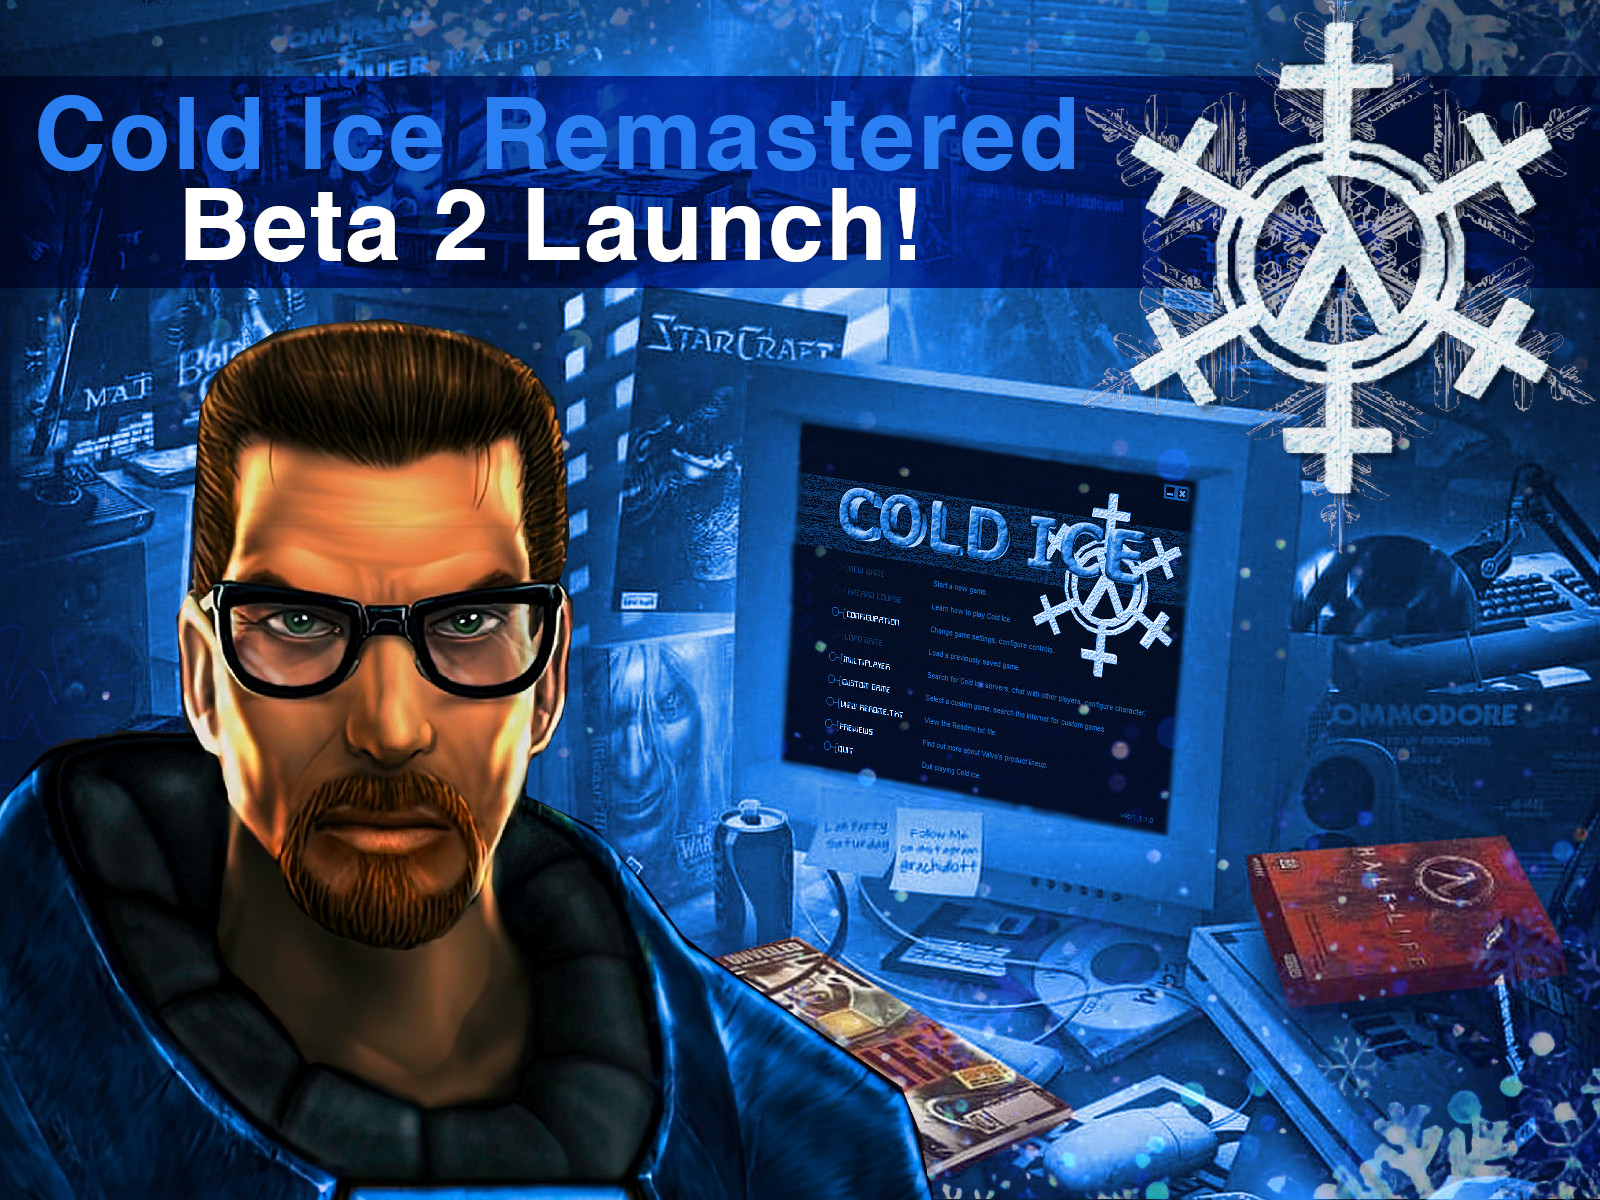 Cold Ice Remastered Beta 2 Launched!